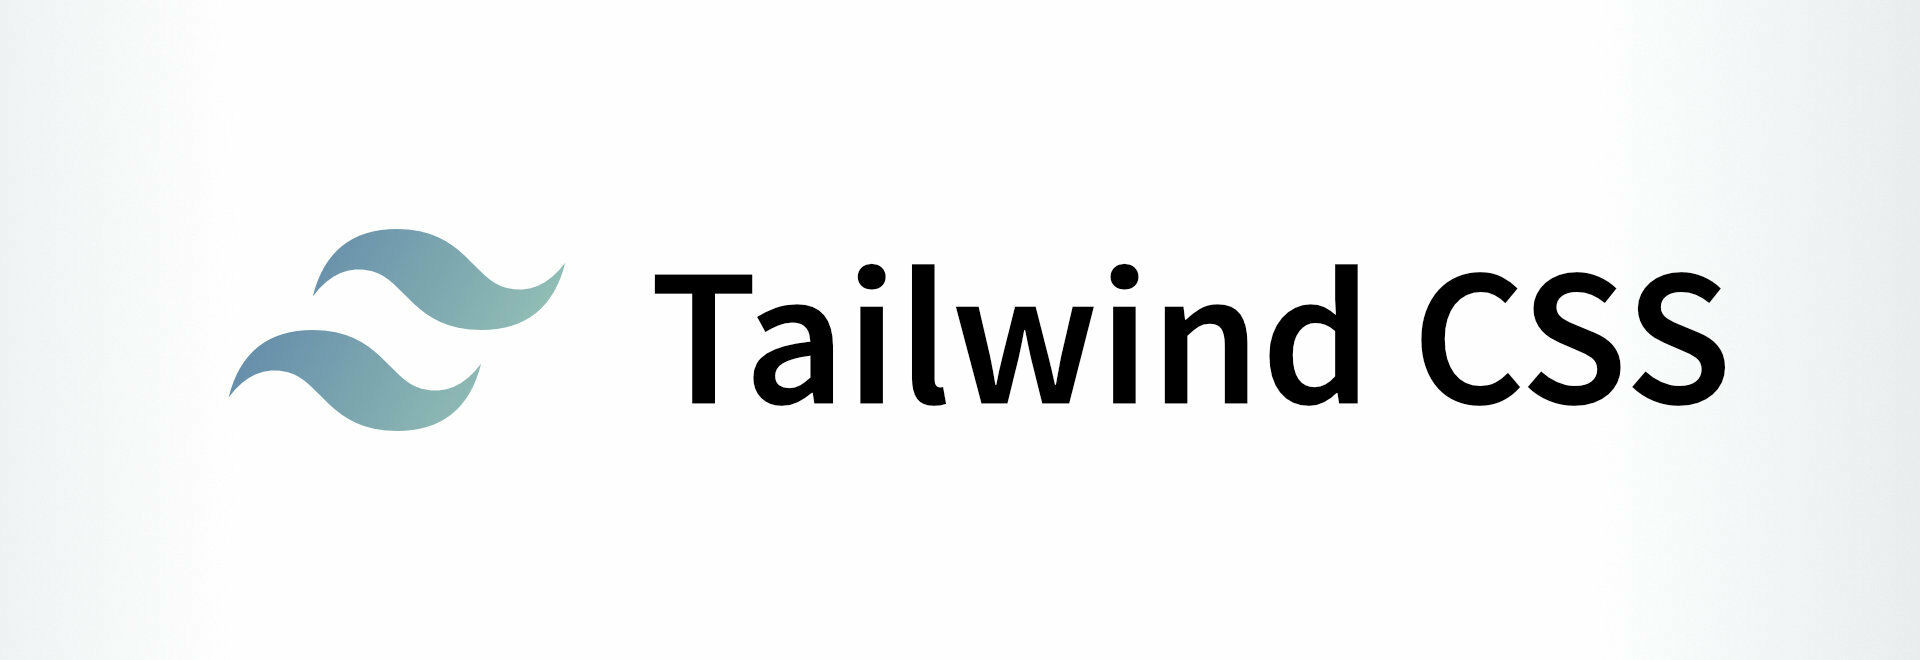 Tailwind border. Tailwind CSS. Tailwind логотип. Tailwind CSS лого. Tailwind CSS logo PNG.